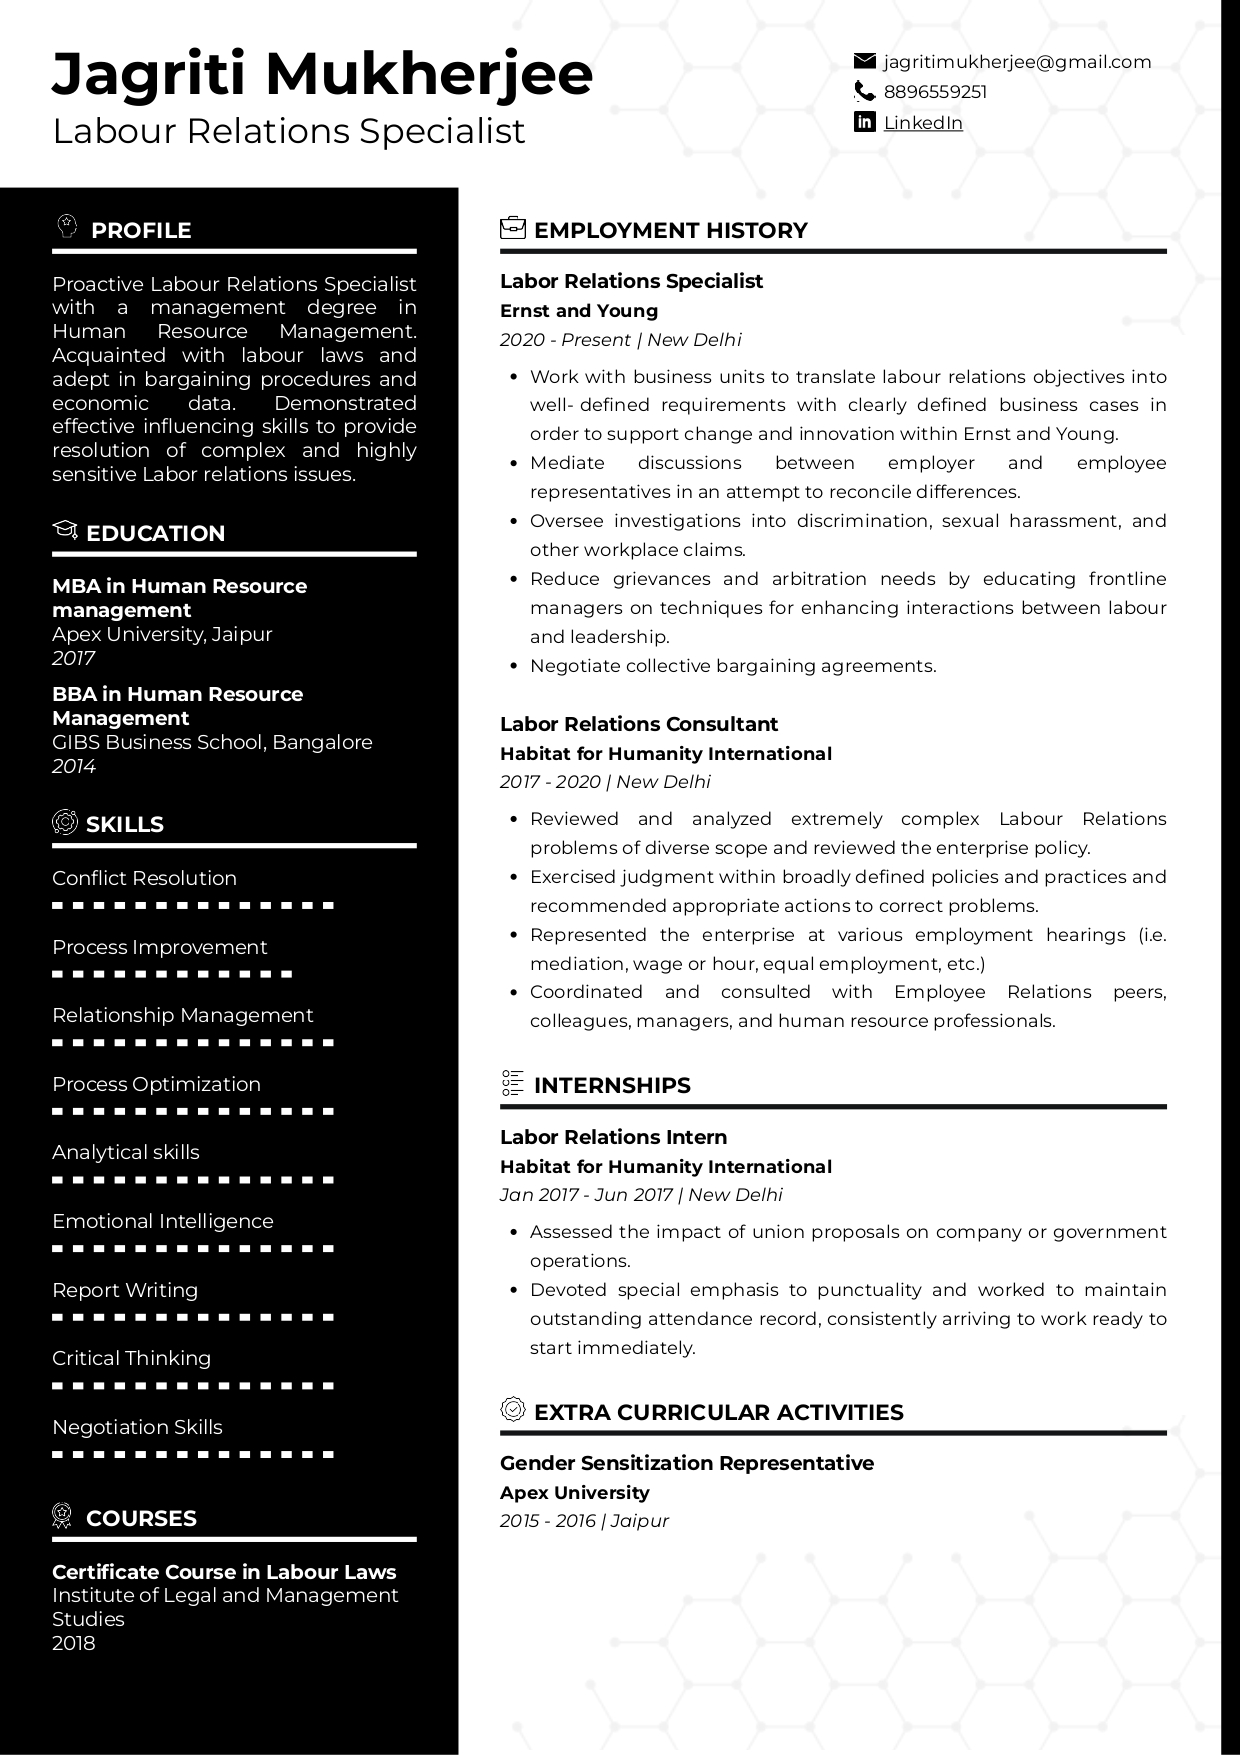 Sample Resume of Labour Relations Specialist | Free Resume Templates & Samples on Resumod.co